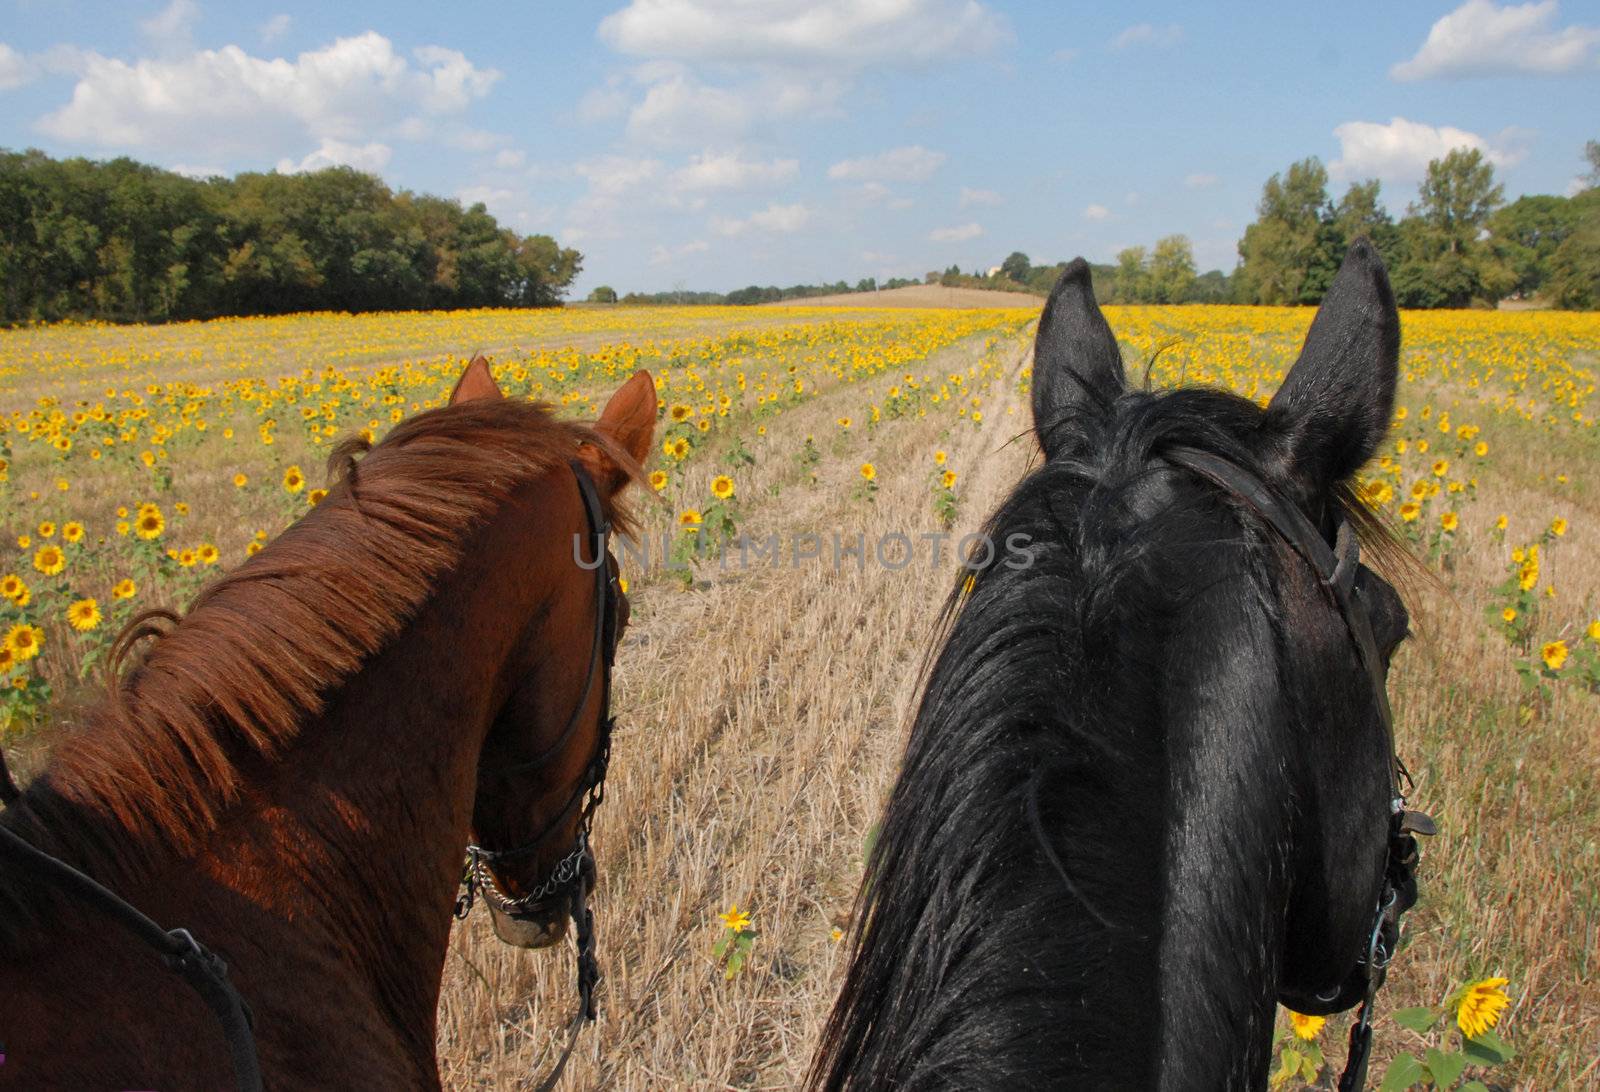 horseback riding in the sunflowers by cynoclub